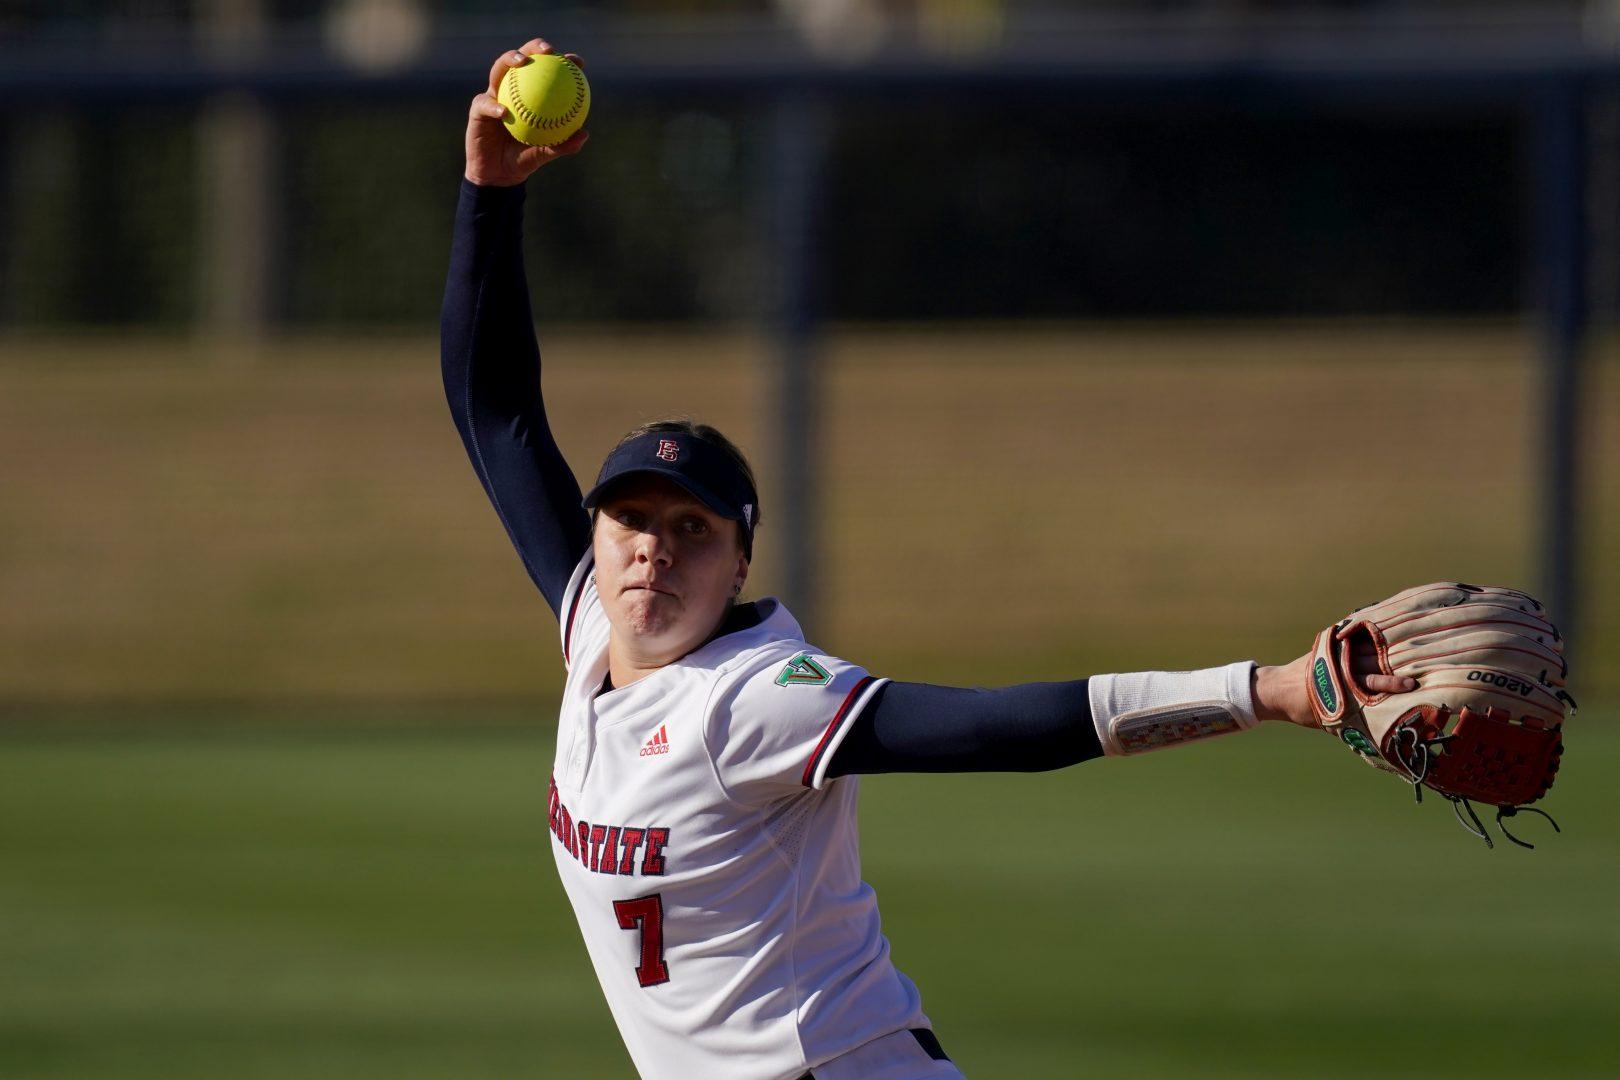 Haley Dolcini delivers a pitch versus Pacific on Friday, Feb. 19 2021 (Photo courtesy of Fresno State Athletics)